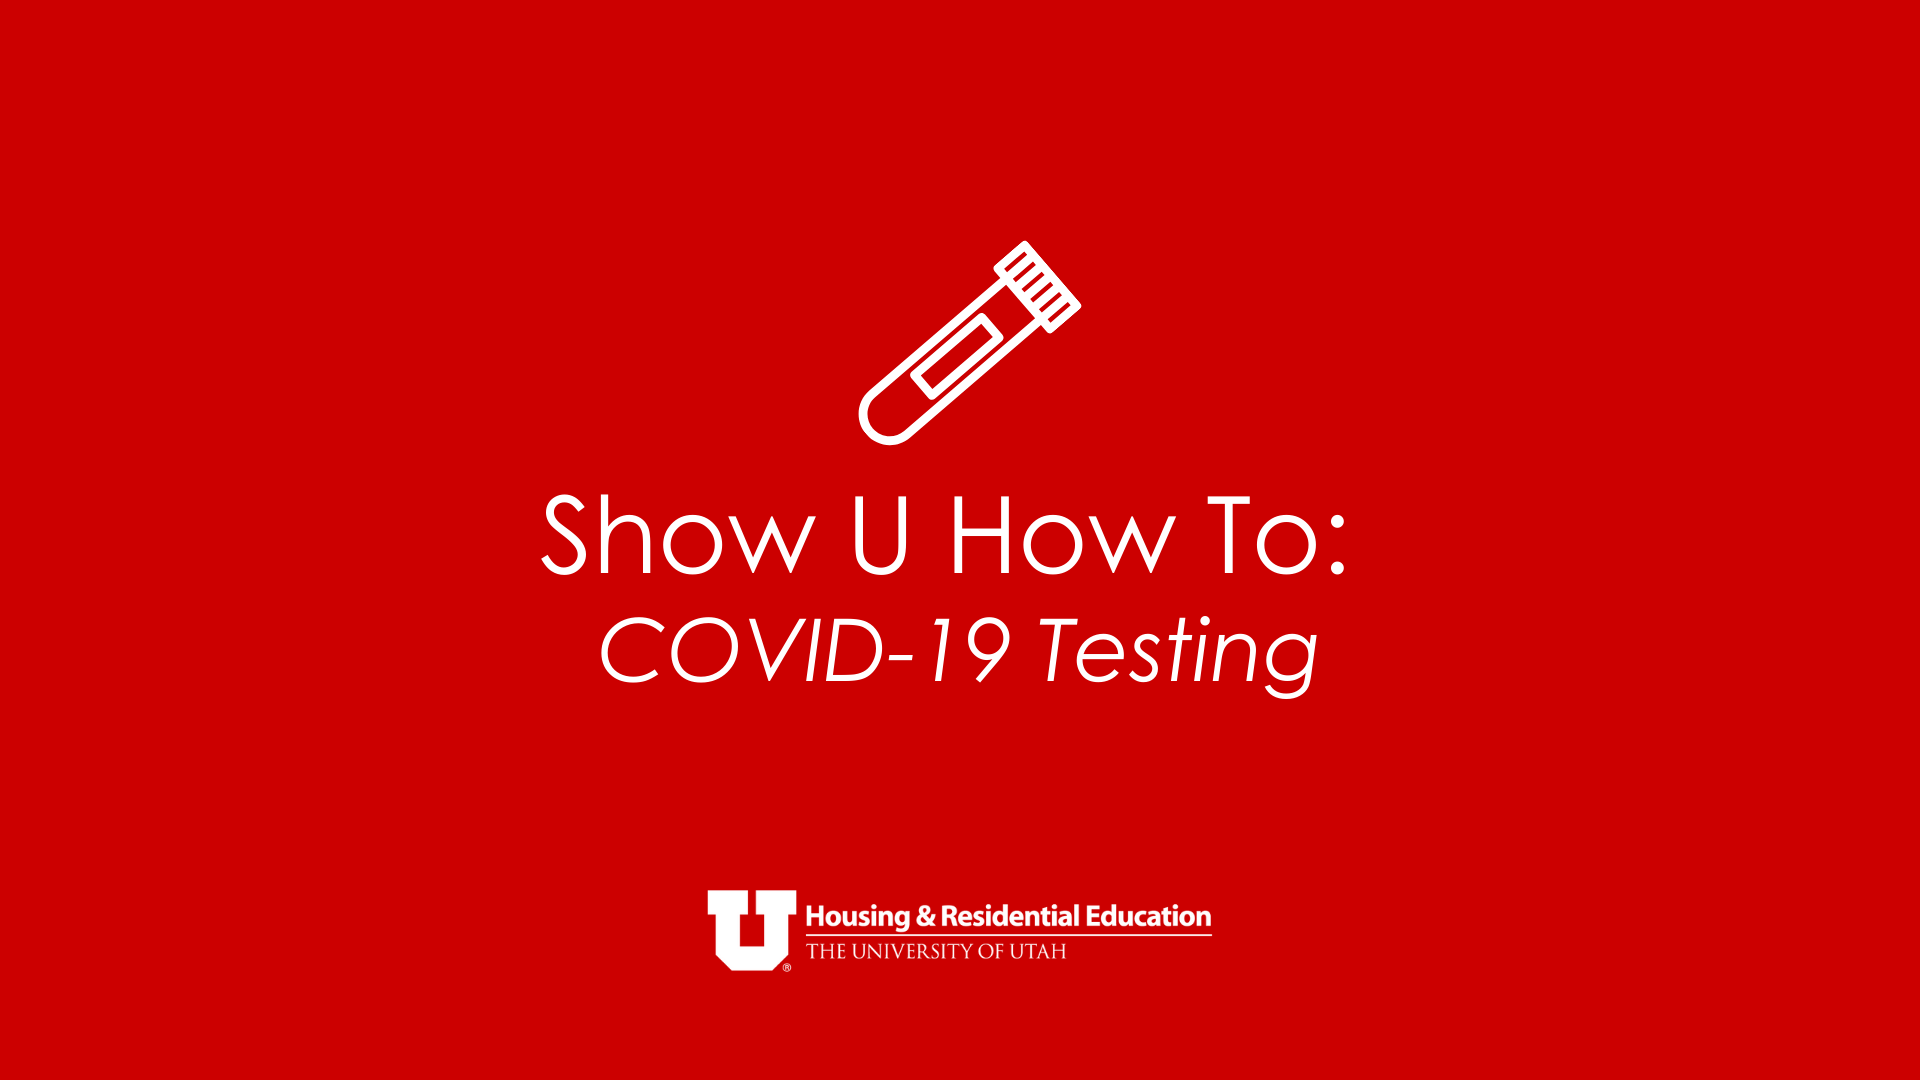 A red background with white text in the center reading "Show U How To: COVID-19 Testing", above that is a graphic of a test tube, and at the bottom is the HRE logo